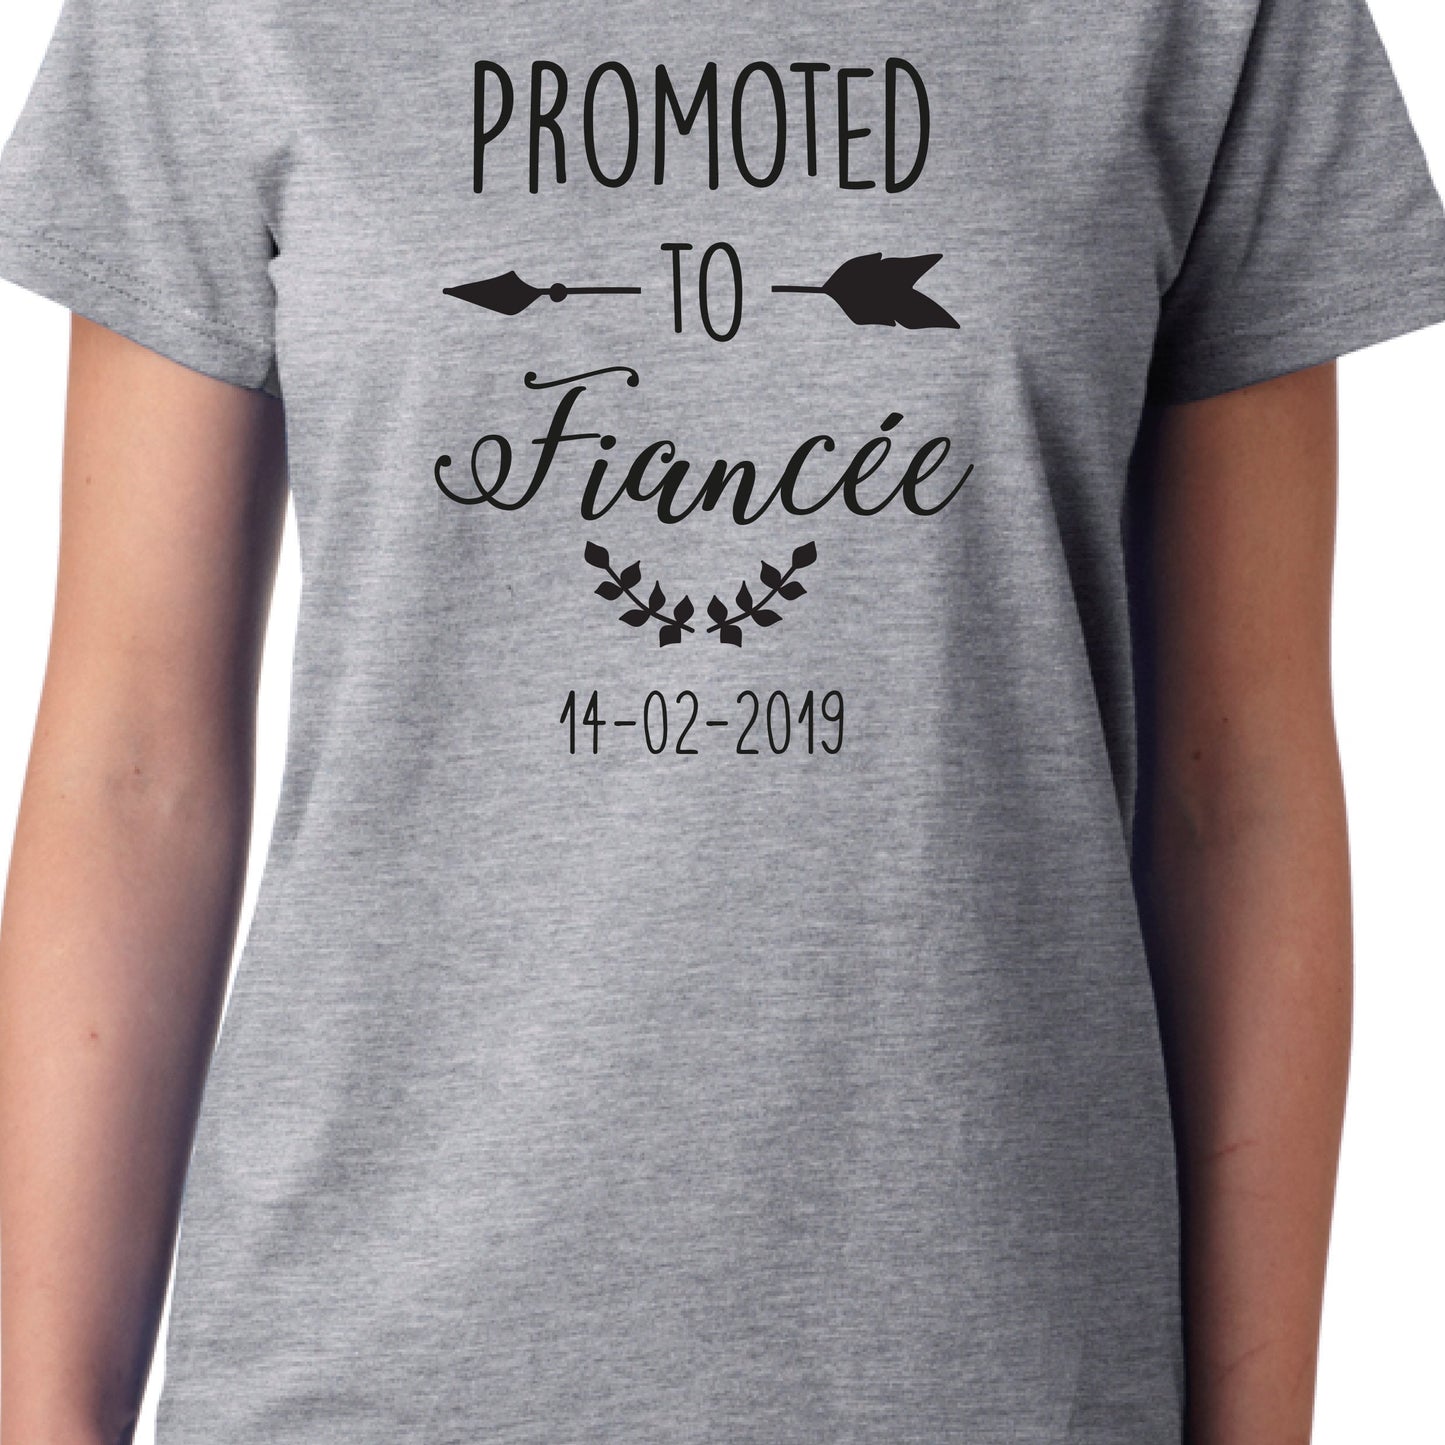 Promoted to Fiance T-Shirt - Can Be Personalised with Name / Date